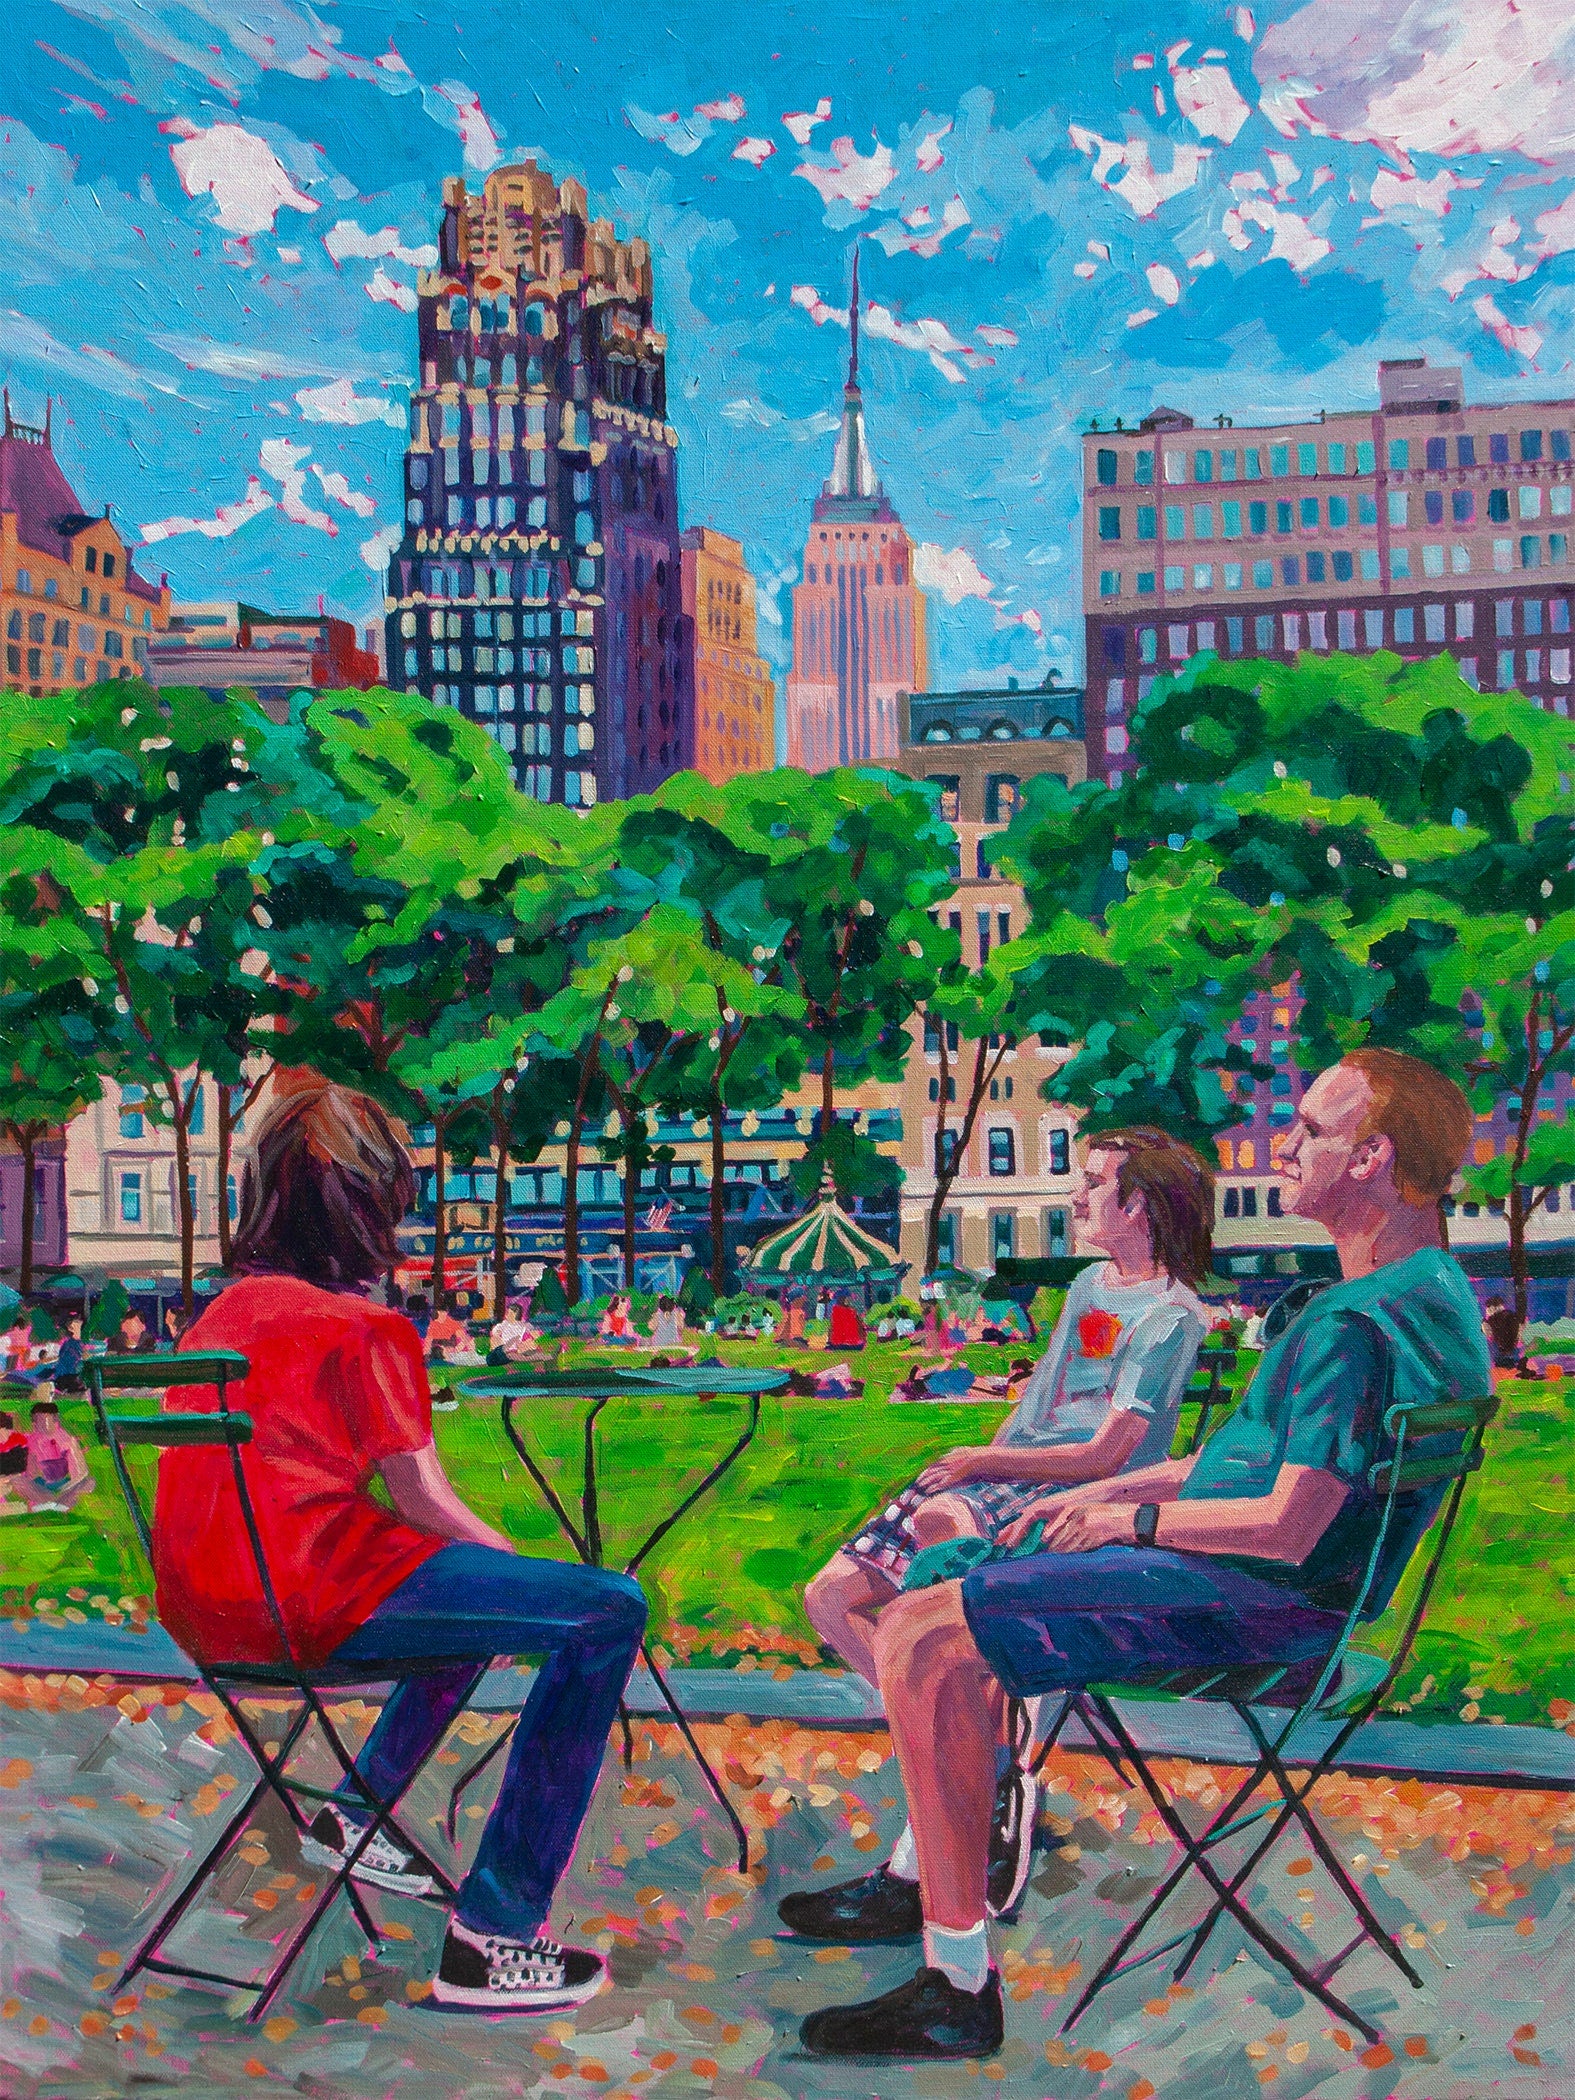 Original vibrant  impressionistic painting of Bryant Park in New York City, three people sit in chairs foreground and look at the Empire State Building in background